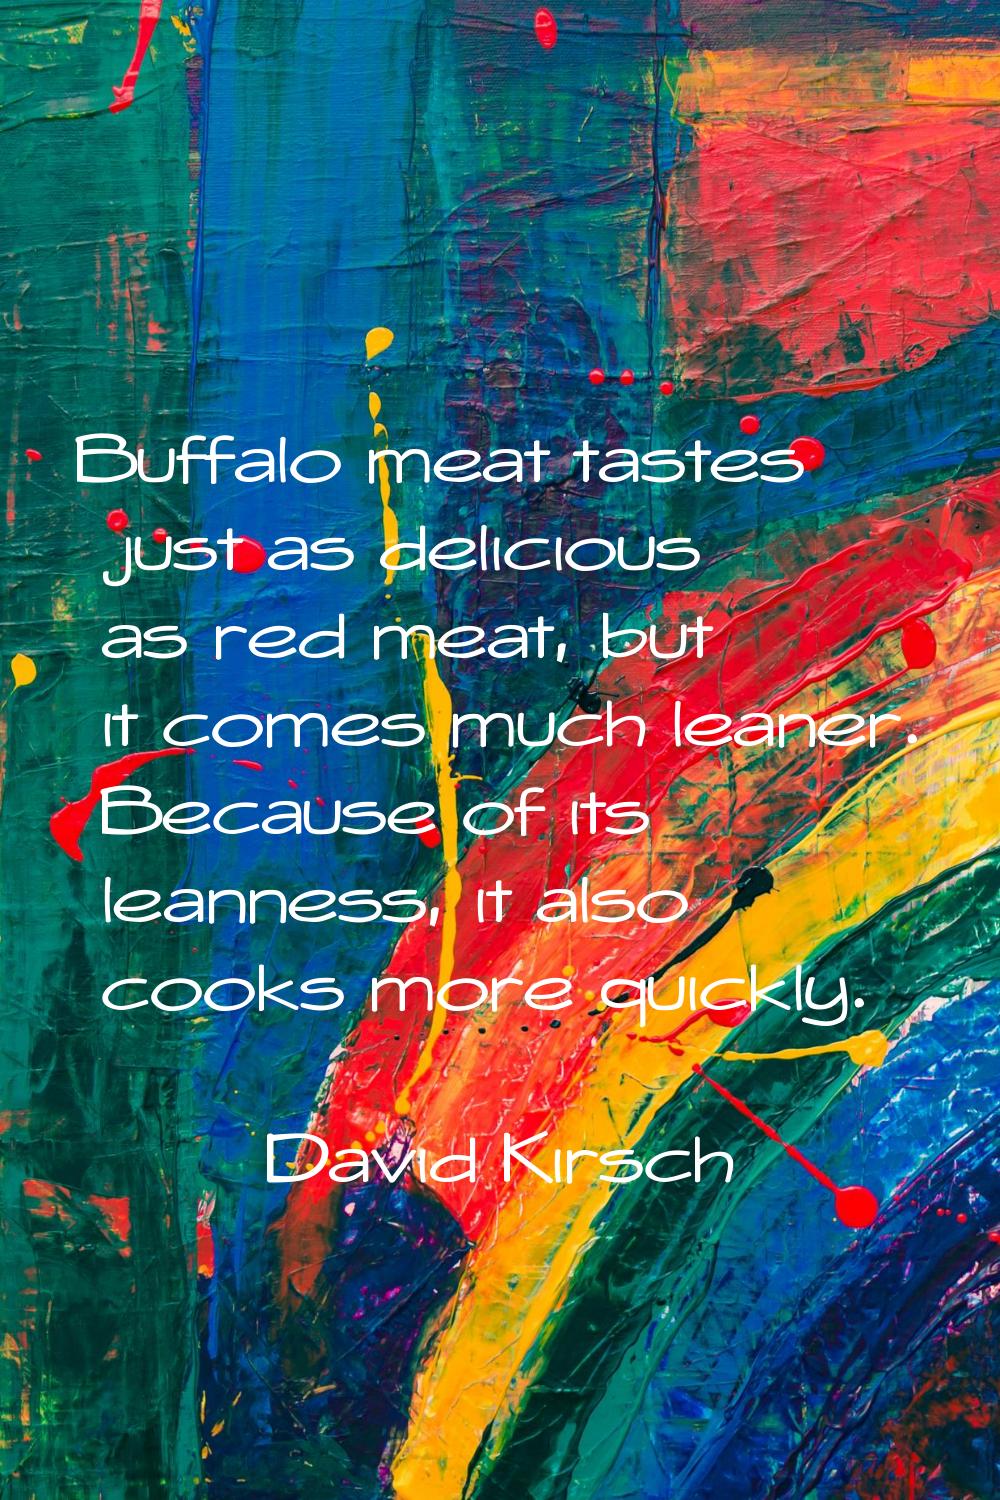 Buffalo meat tastes just as delicious as red meat, but it comes much leaner. Because of its leannes